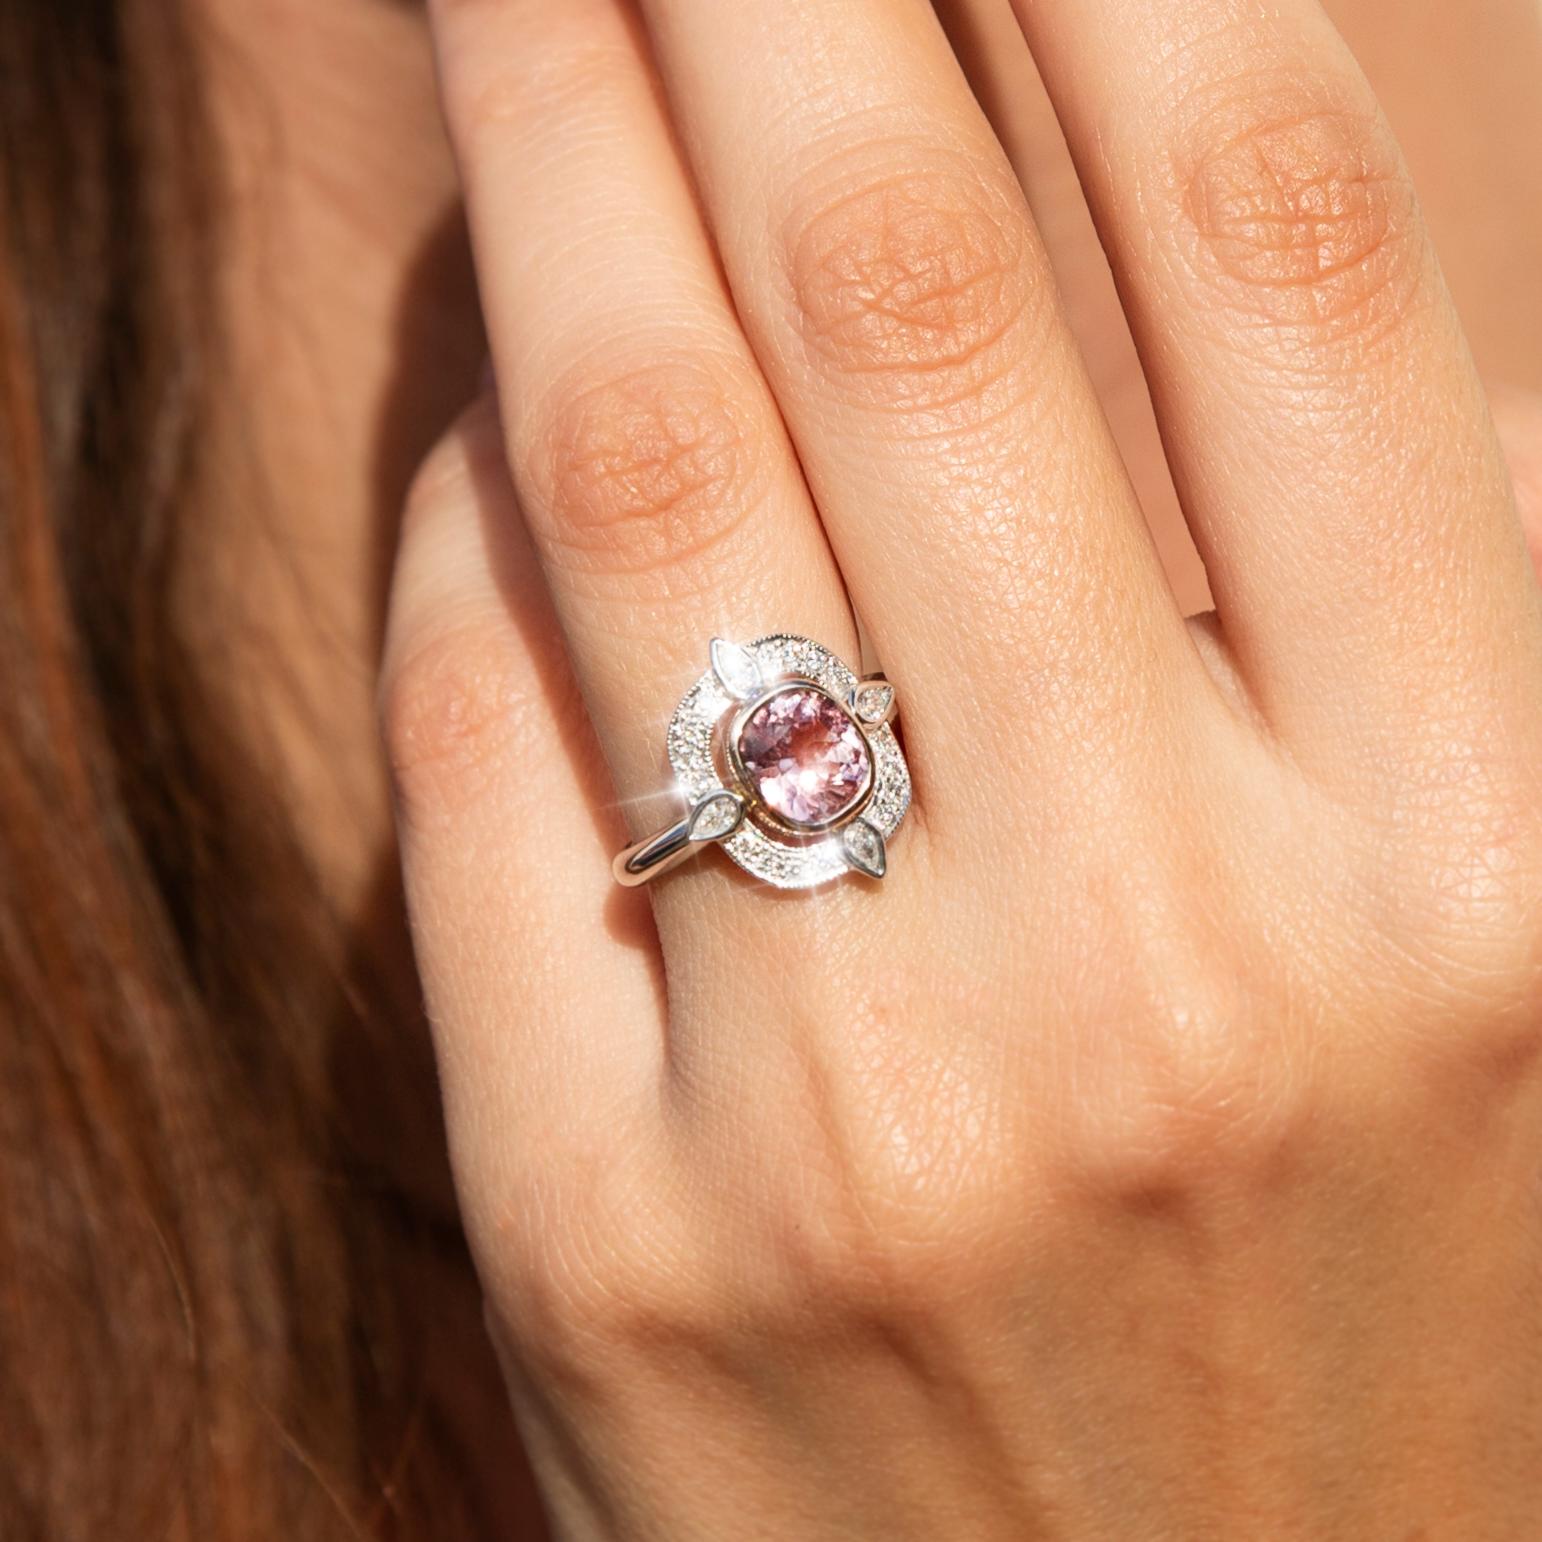 Lovingly handcrafted in shimmering 18 carat white and rose gold, this wonderful contemporary cluster ring is a masterwork of elegant design. The gleaming tapered white gold band holds a gorgeous gallery with an adorable cushion cut pink spinel